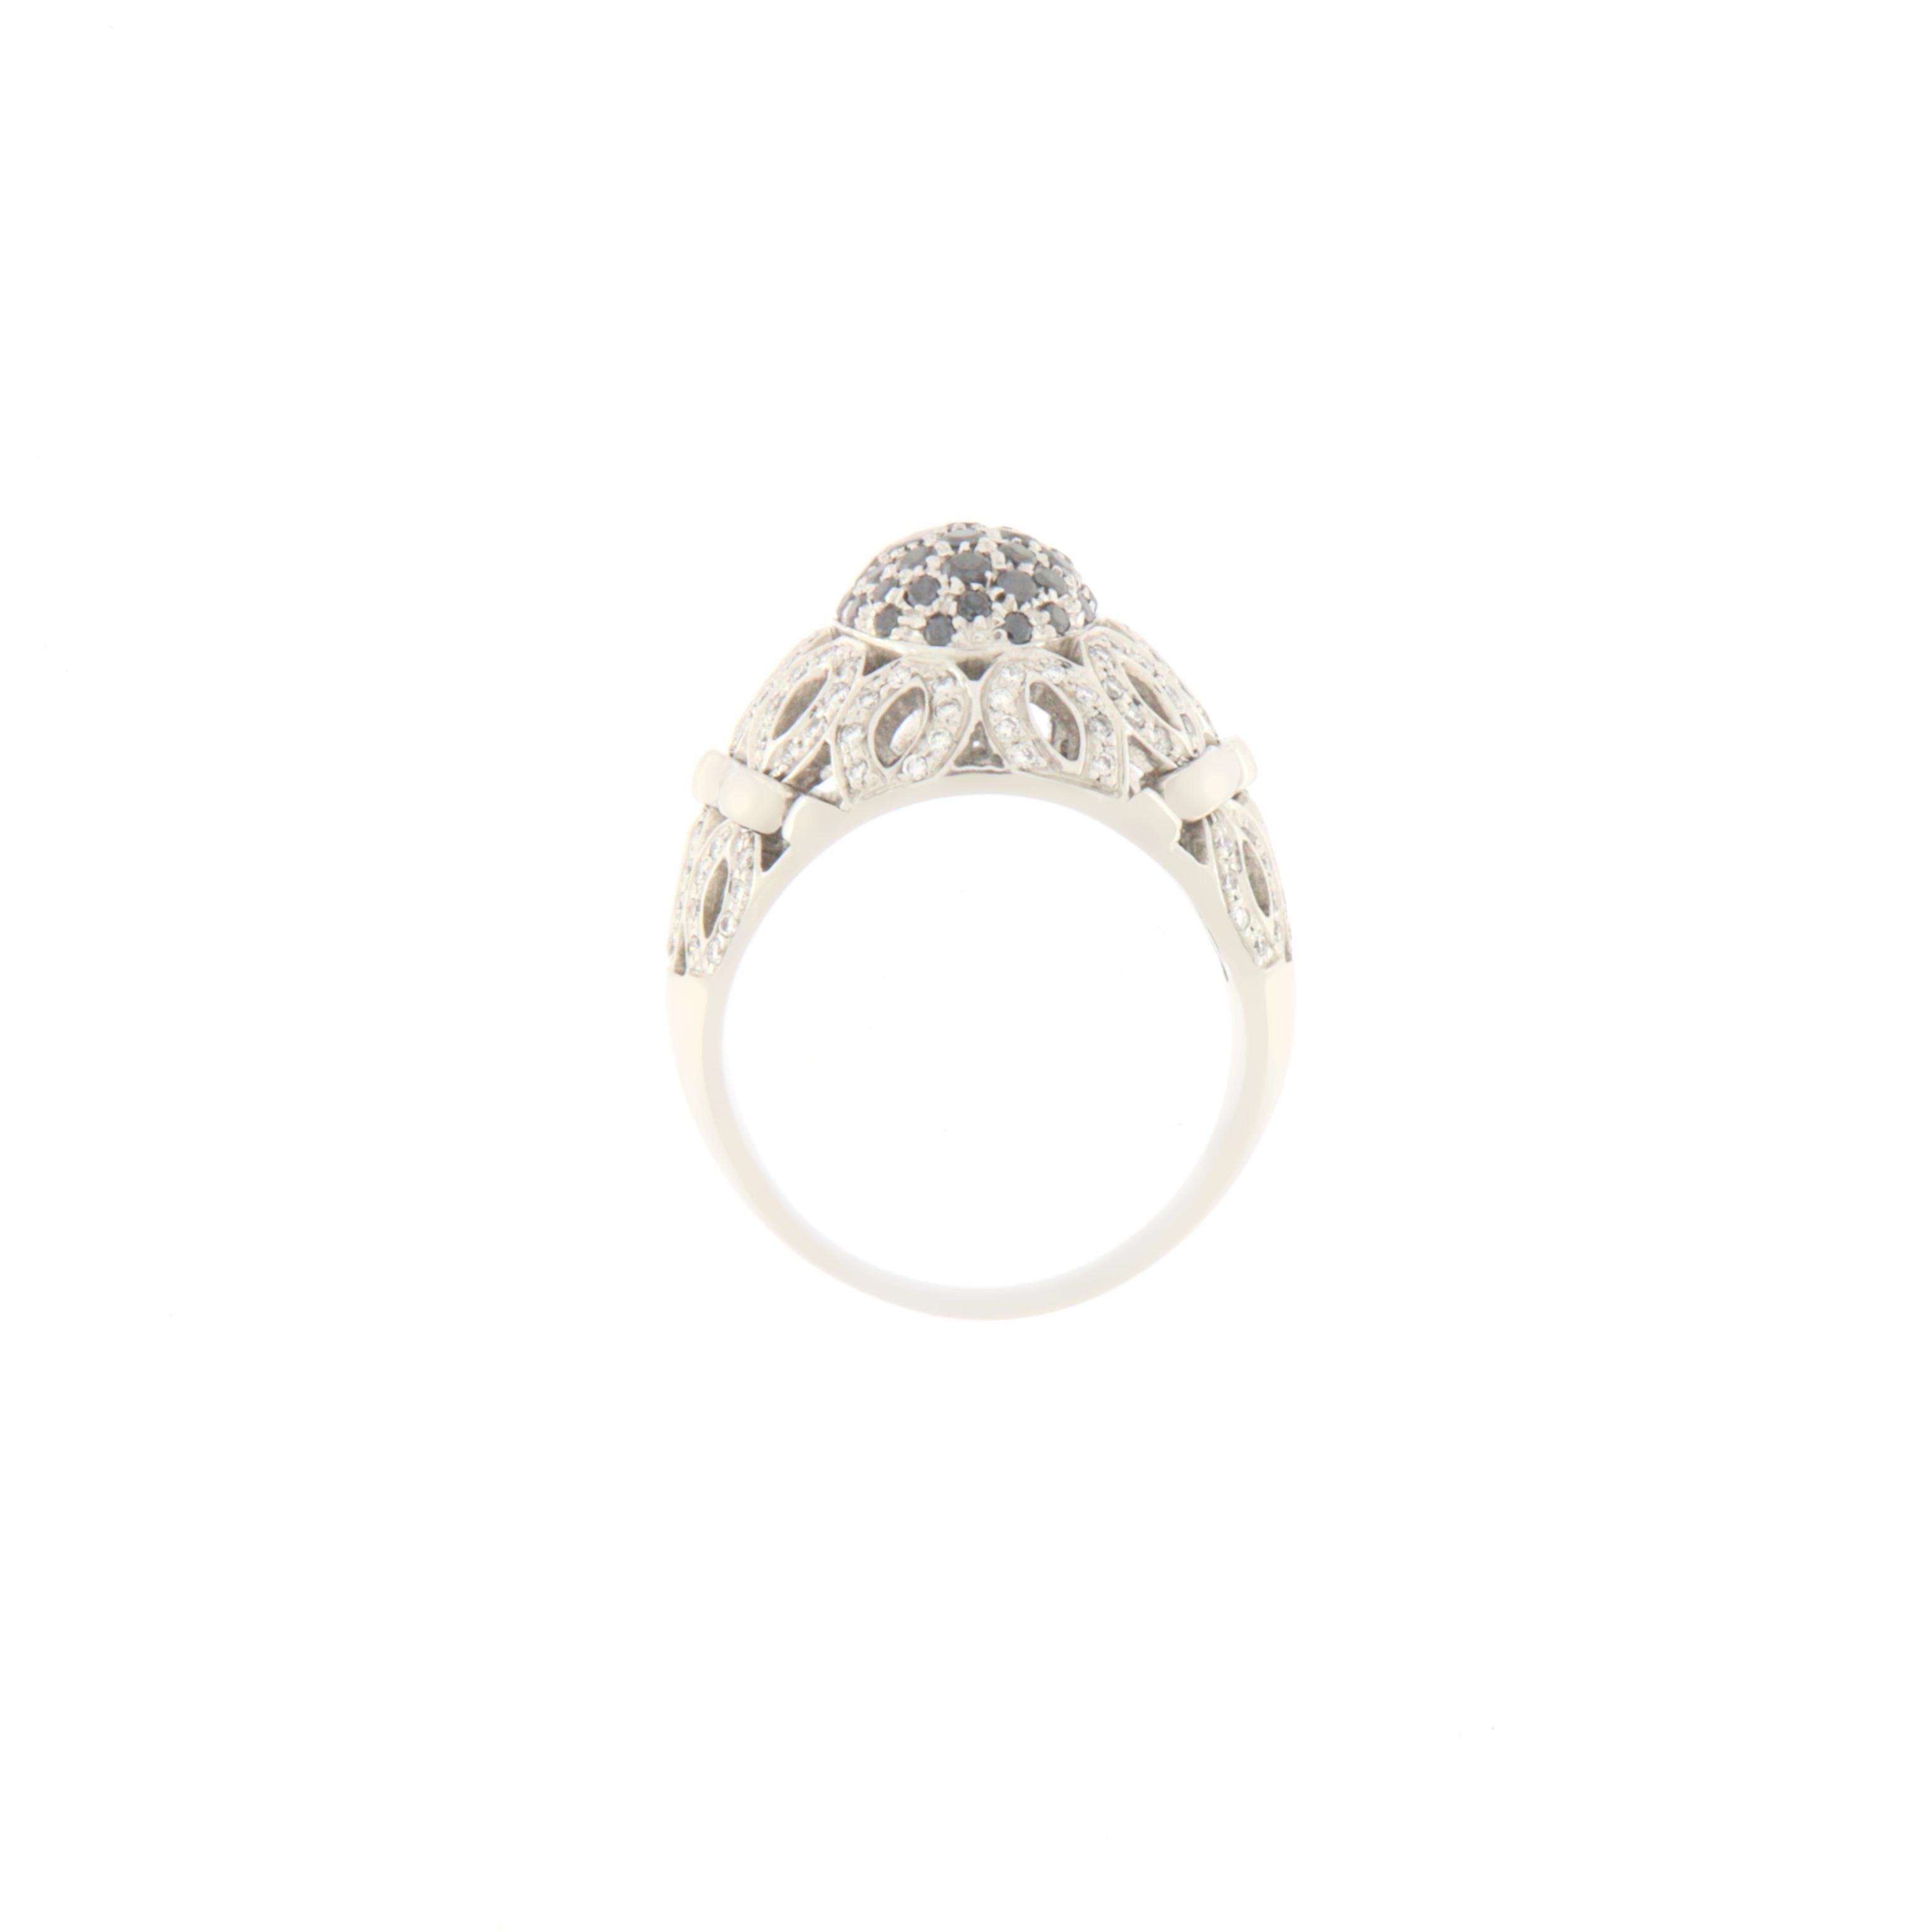 Made in Italy 18-karat white gold ring made by Leo Pizzo.
The band model ring has about 2.95 carats of natural diamonds set while on the upper central patch there are black diamonds set.
Elegant ring suitable for any type of occasion.

Total weight